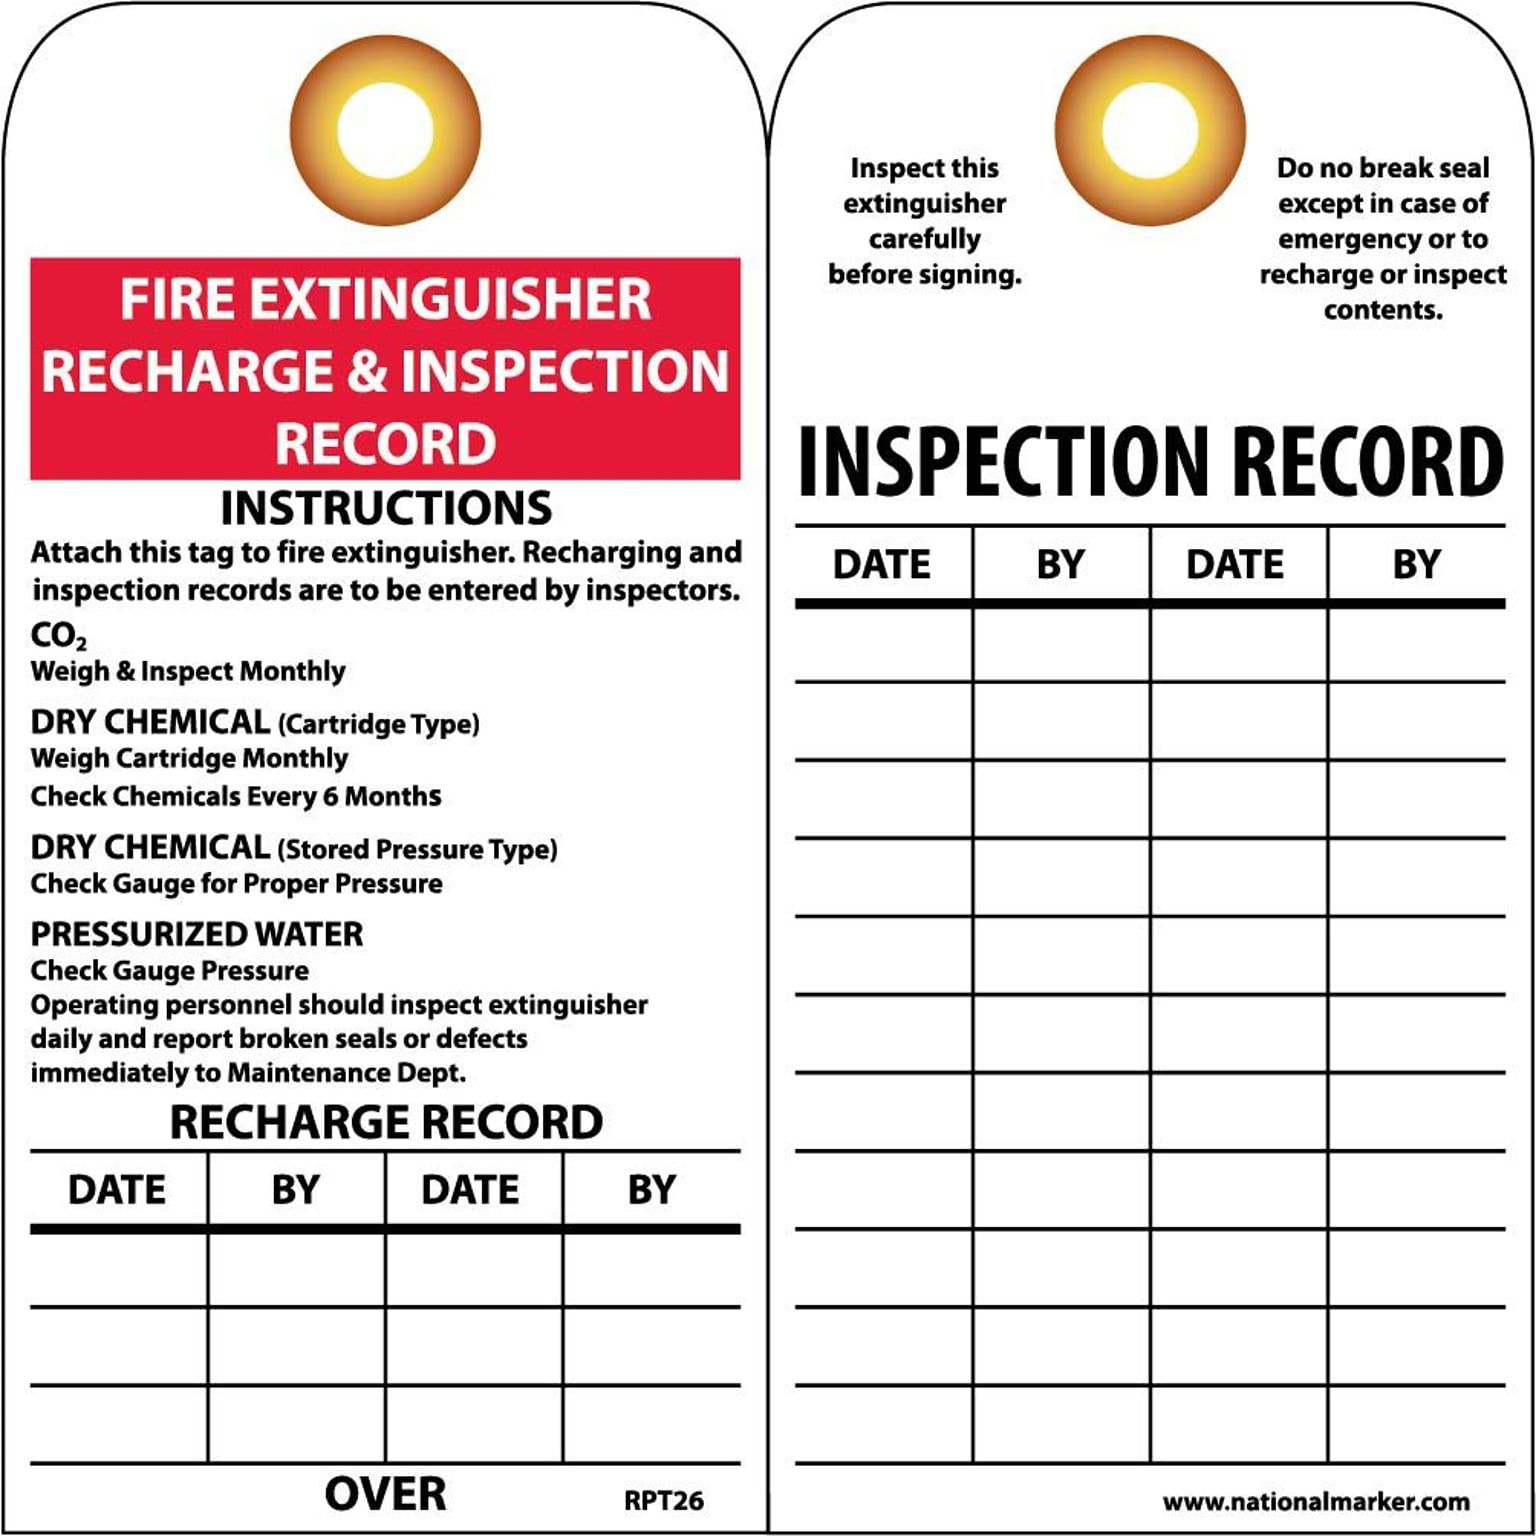 Accident Prevention Tags; Fire Extinguisher Recharge And Inspect, 6 x 3, Unrip Vinyl W/Grommet, 25/Pack